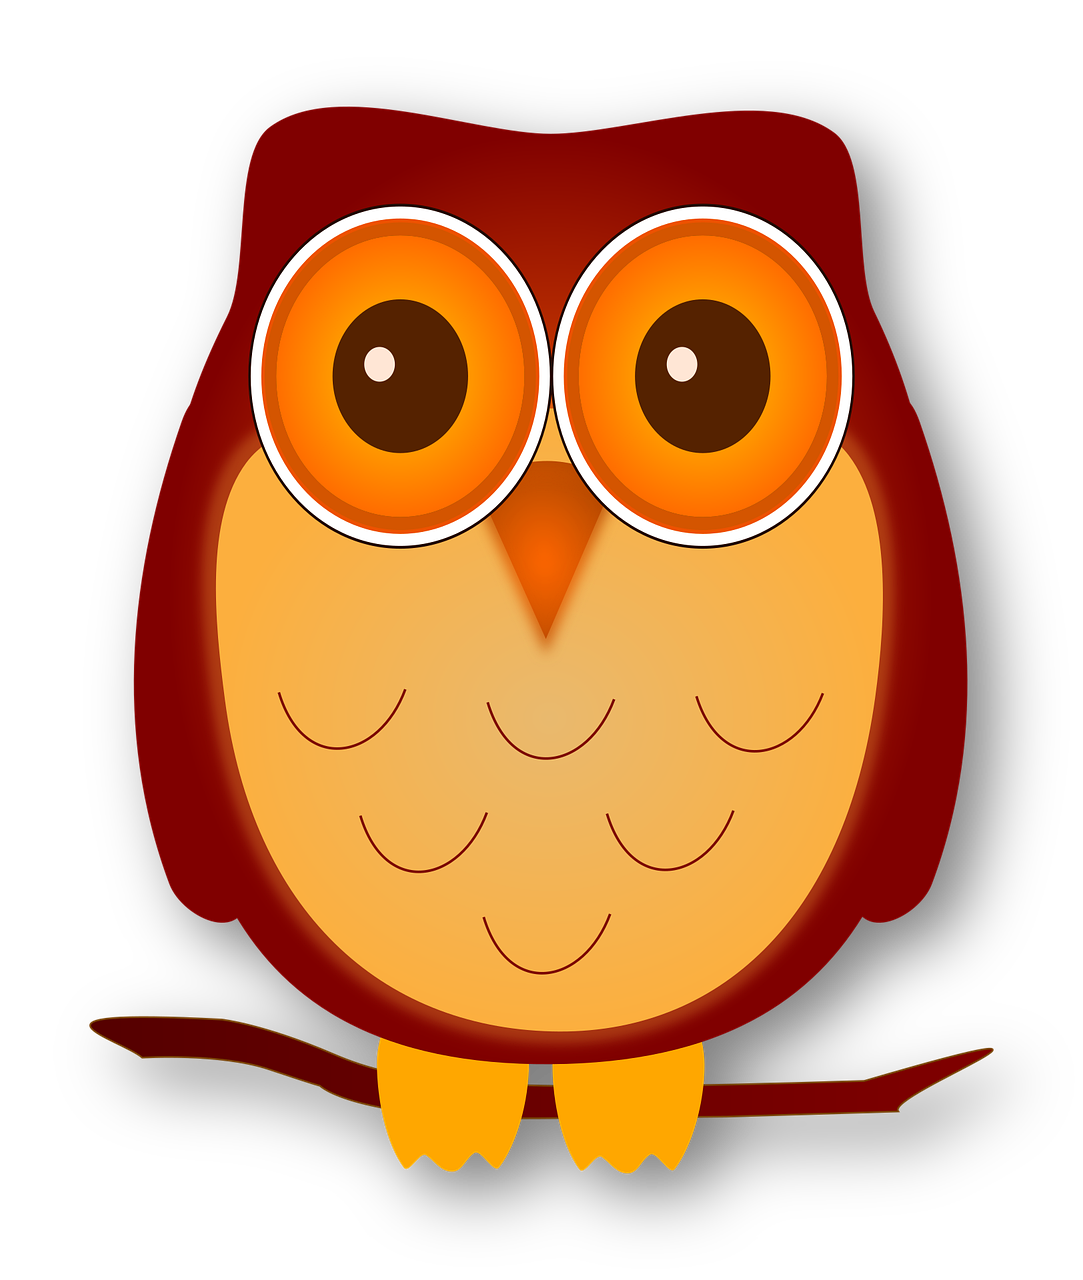 an owl with big eyes sitting on a branch, inspired by Leo Leuppi, pixabay, dada, red and orange colored, !!wearing glasses!!, nighttime!!, cute face big eyes and smiley